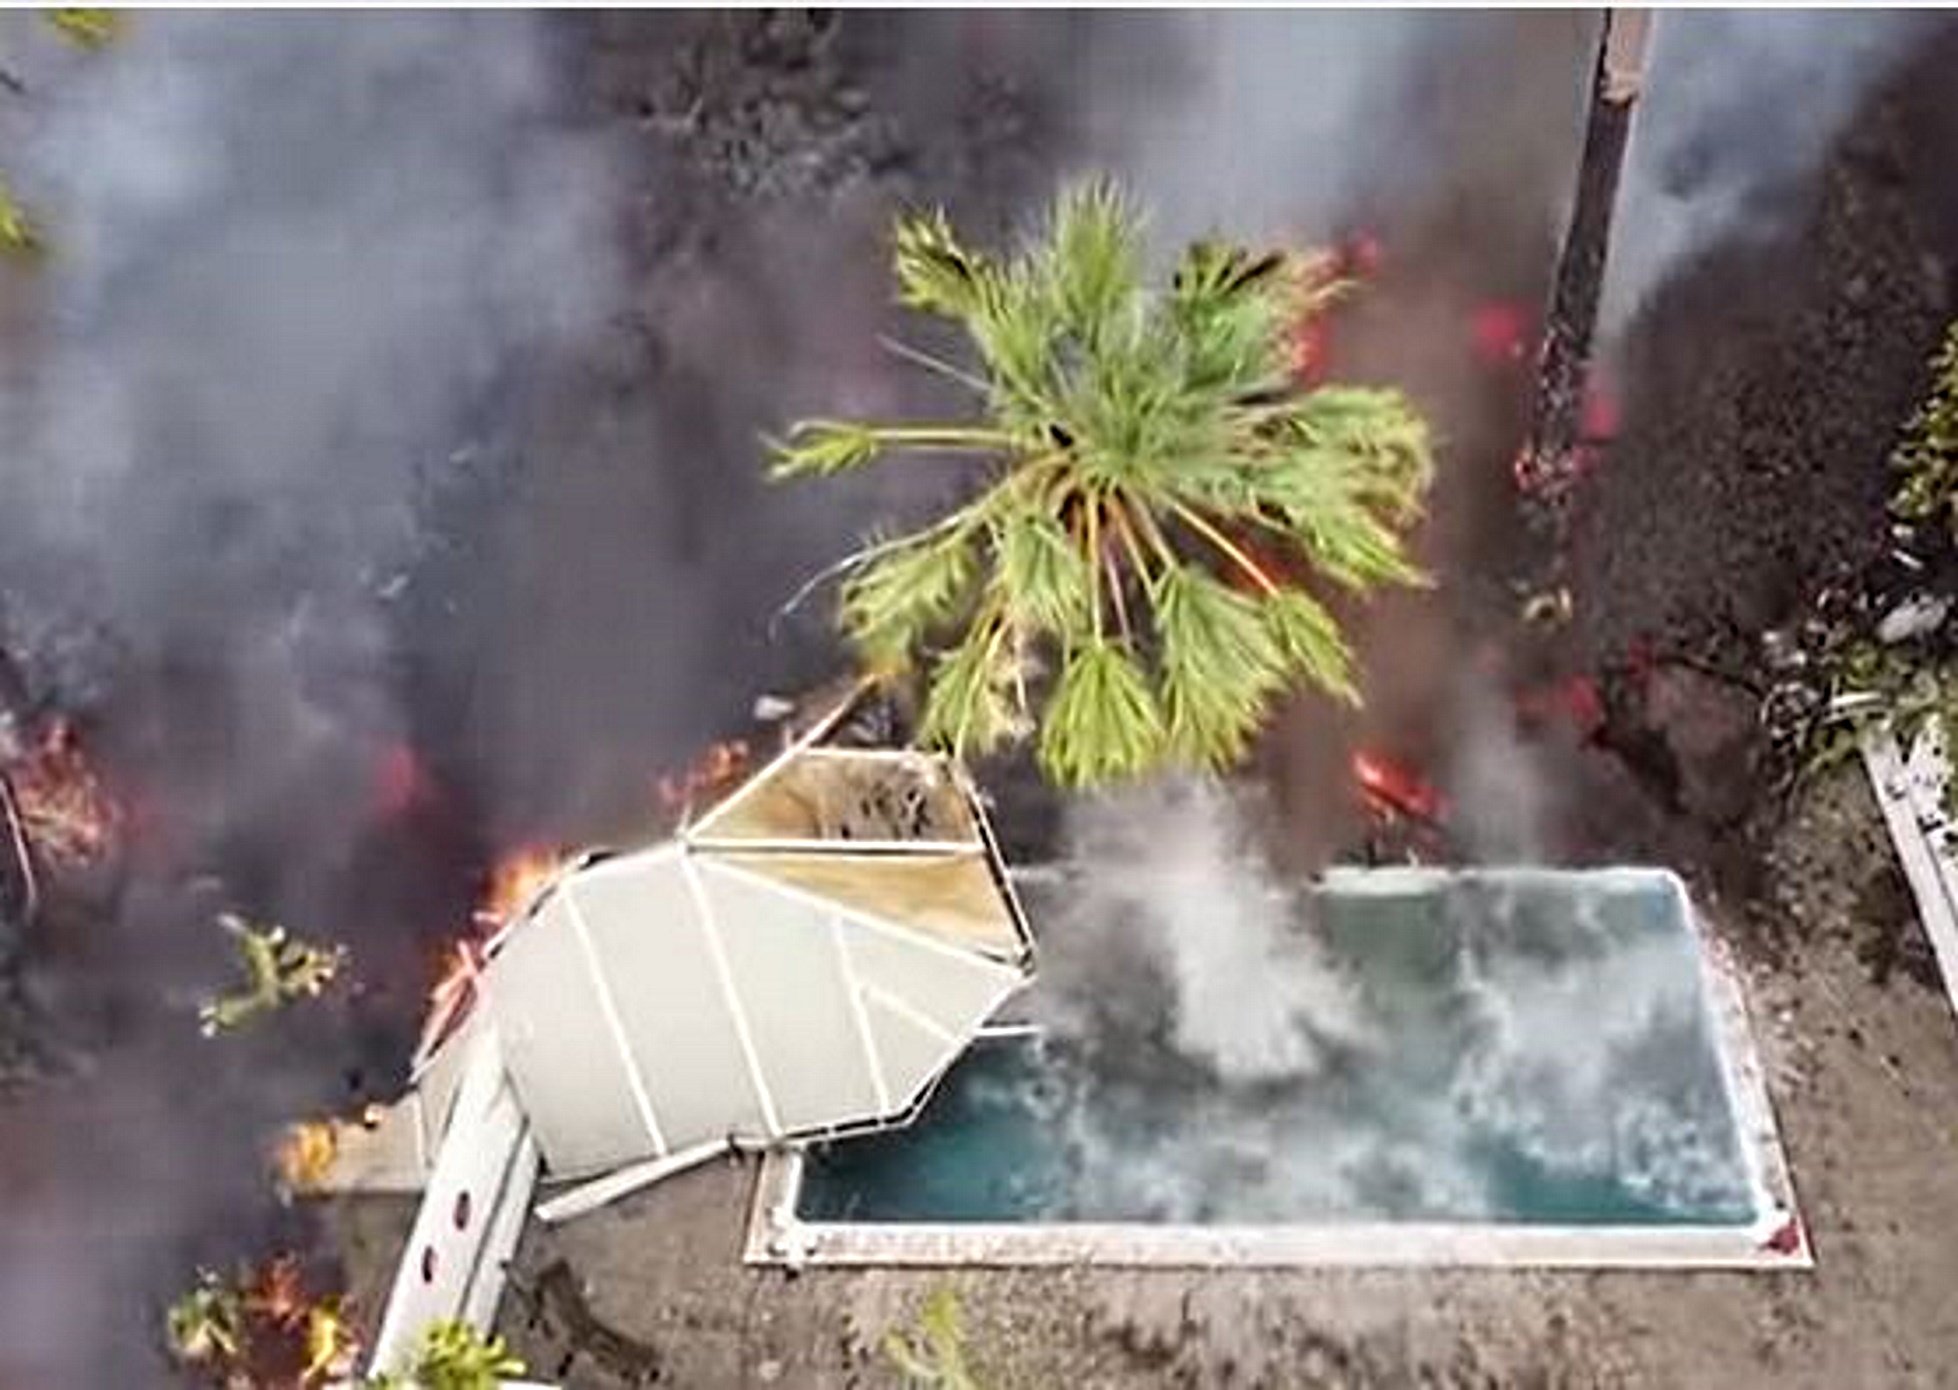 VIDEO | The most spectacular images of the La Palma volcanic eruption